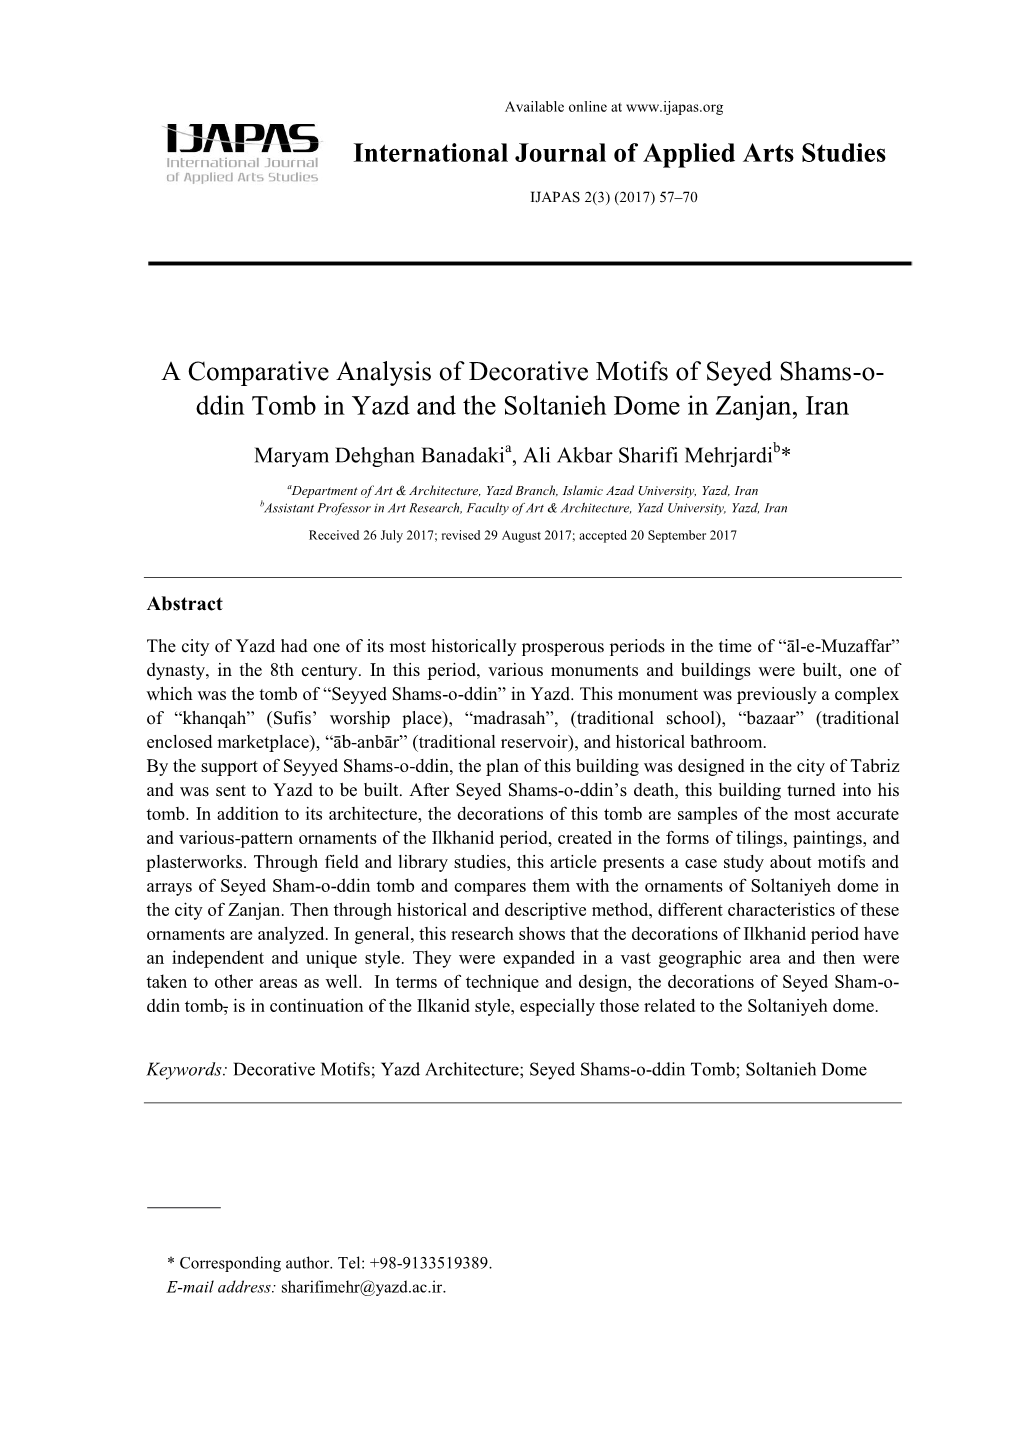 International Journal of Applied Arts Studies a Comparative Analysis of Decorative Motifs of Seyed Shams-O- Ddin Tomb in Yazd An